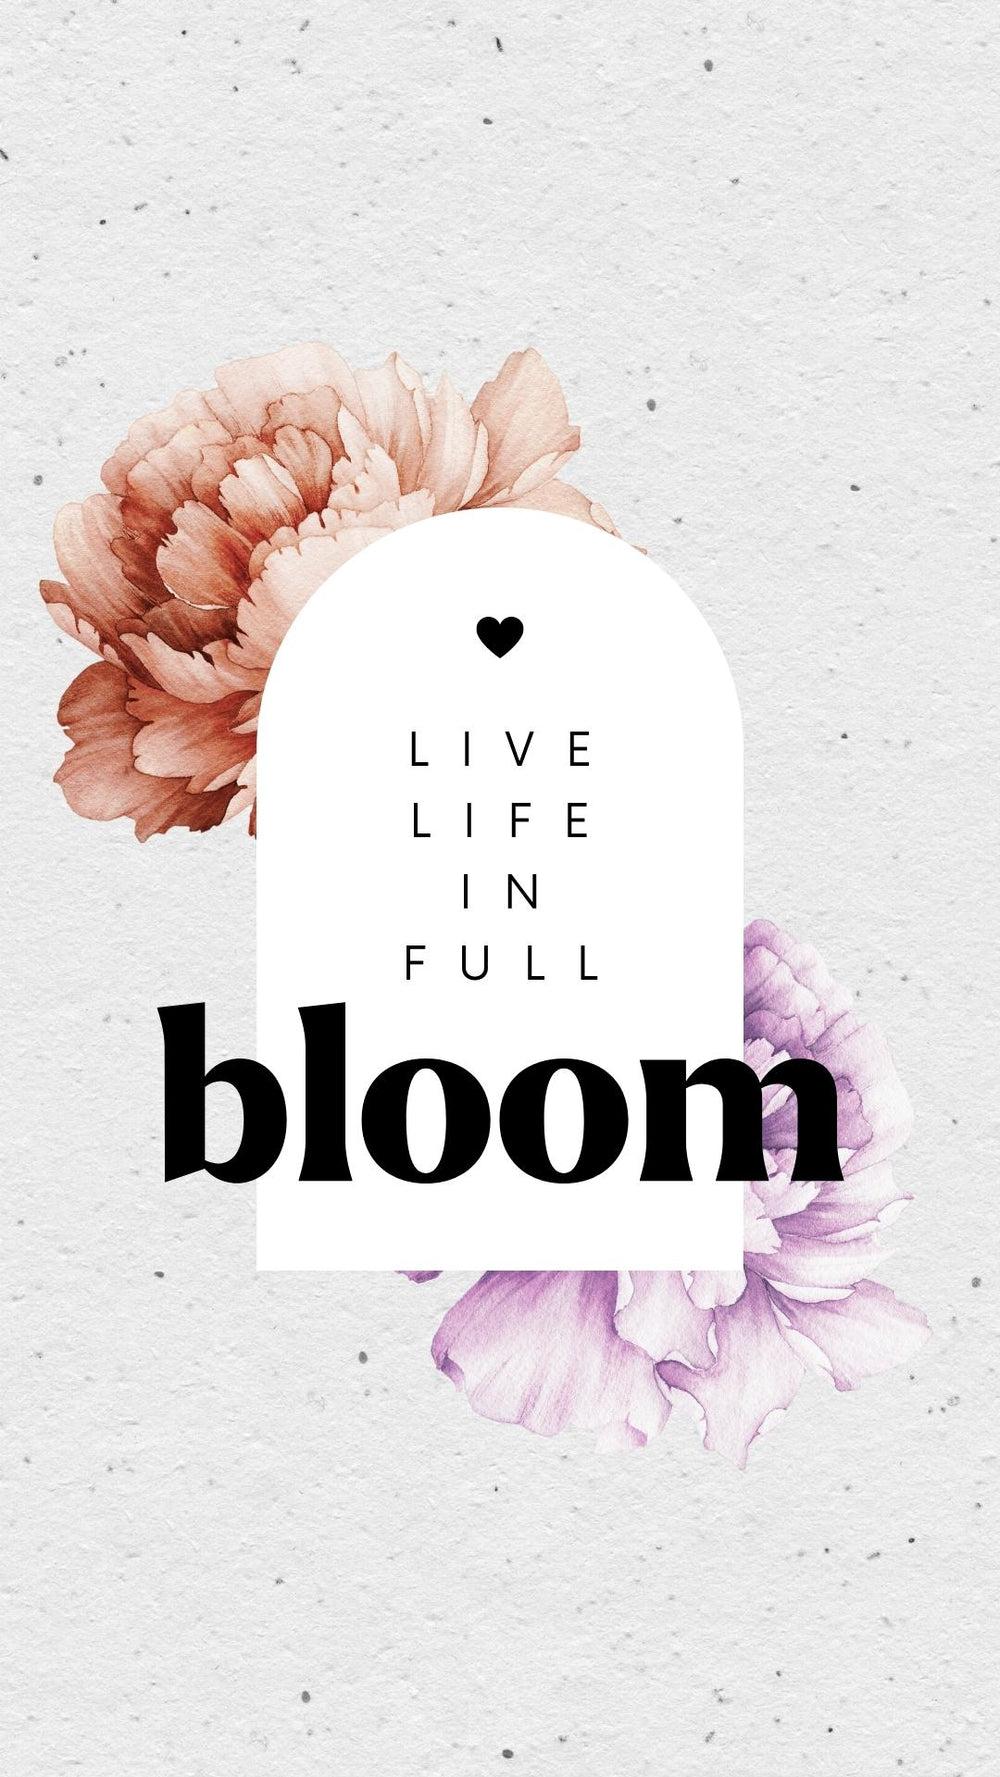 Bloom Collection Inspirational Phone Wallpaper For